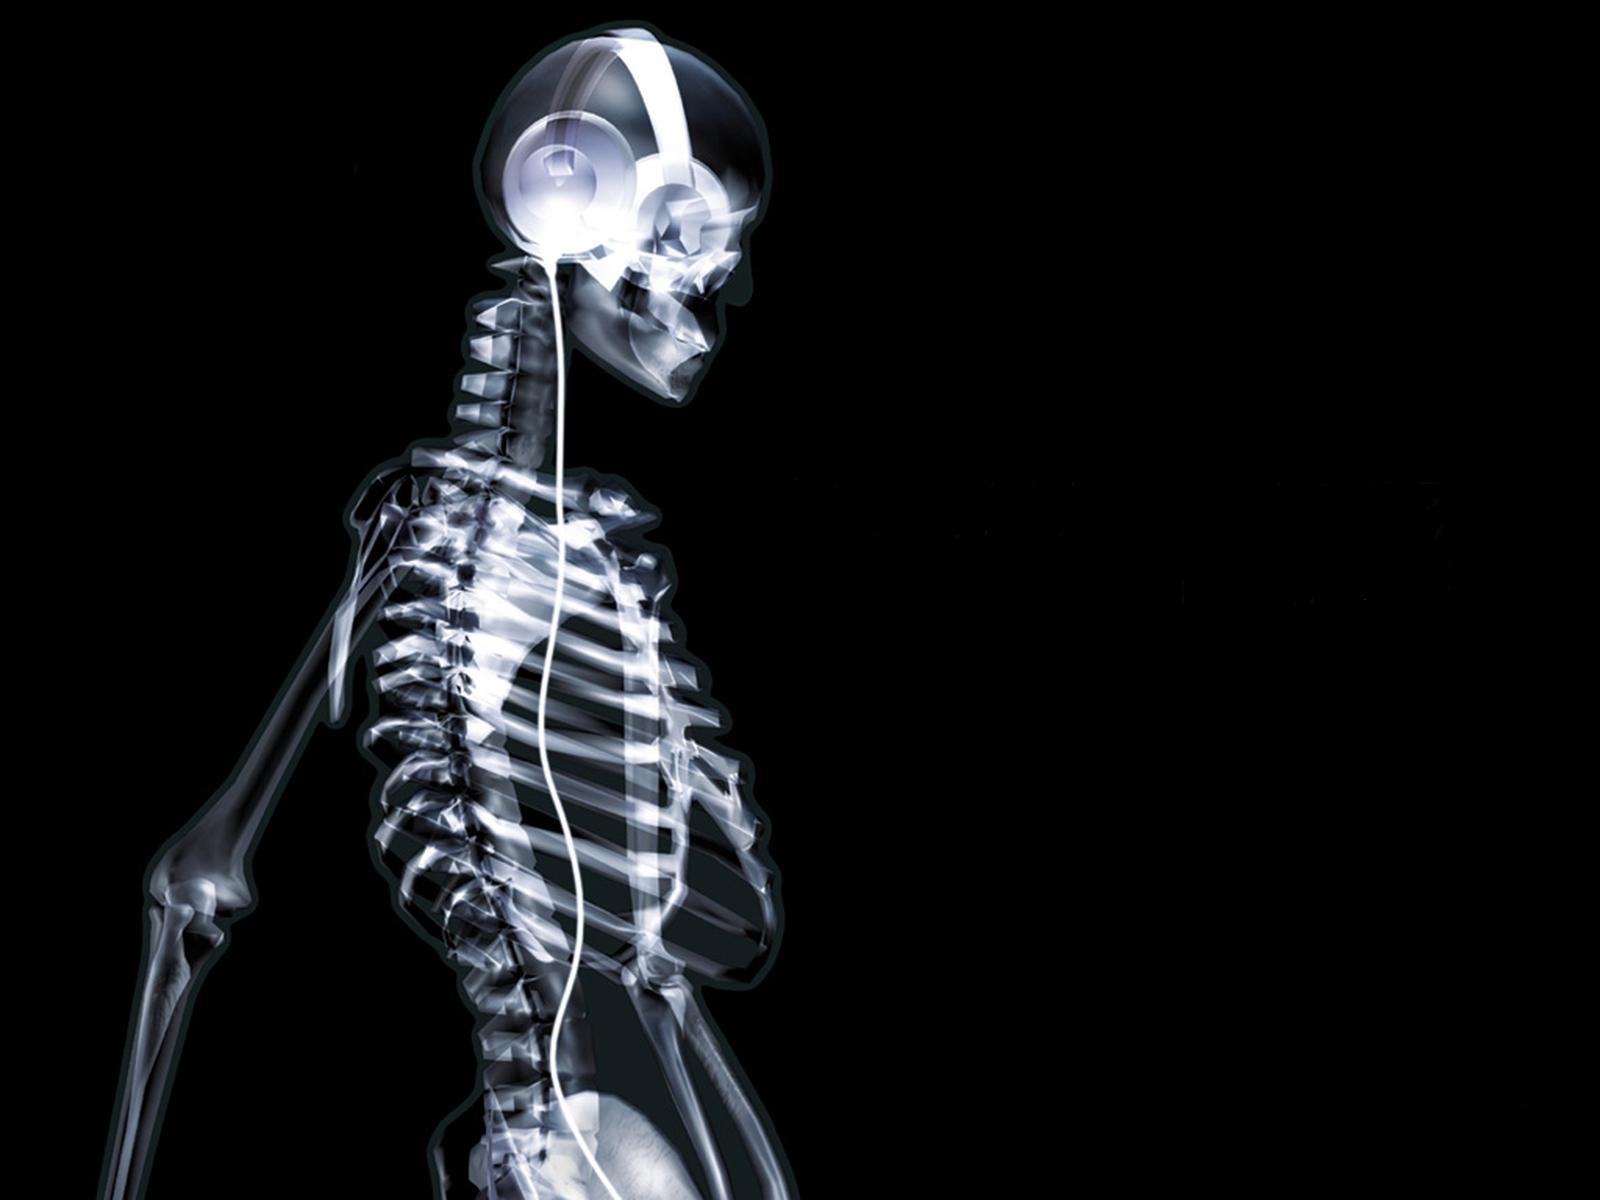 Hd Wallpapers City: Skeleton on X ray